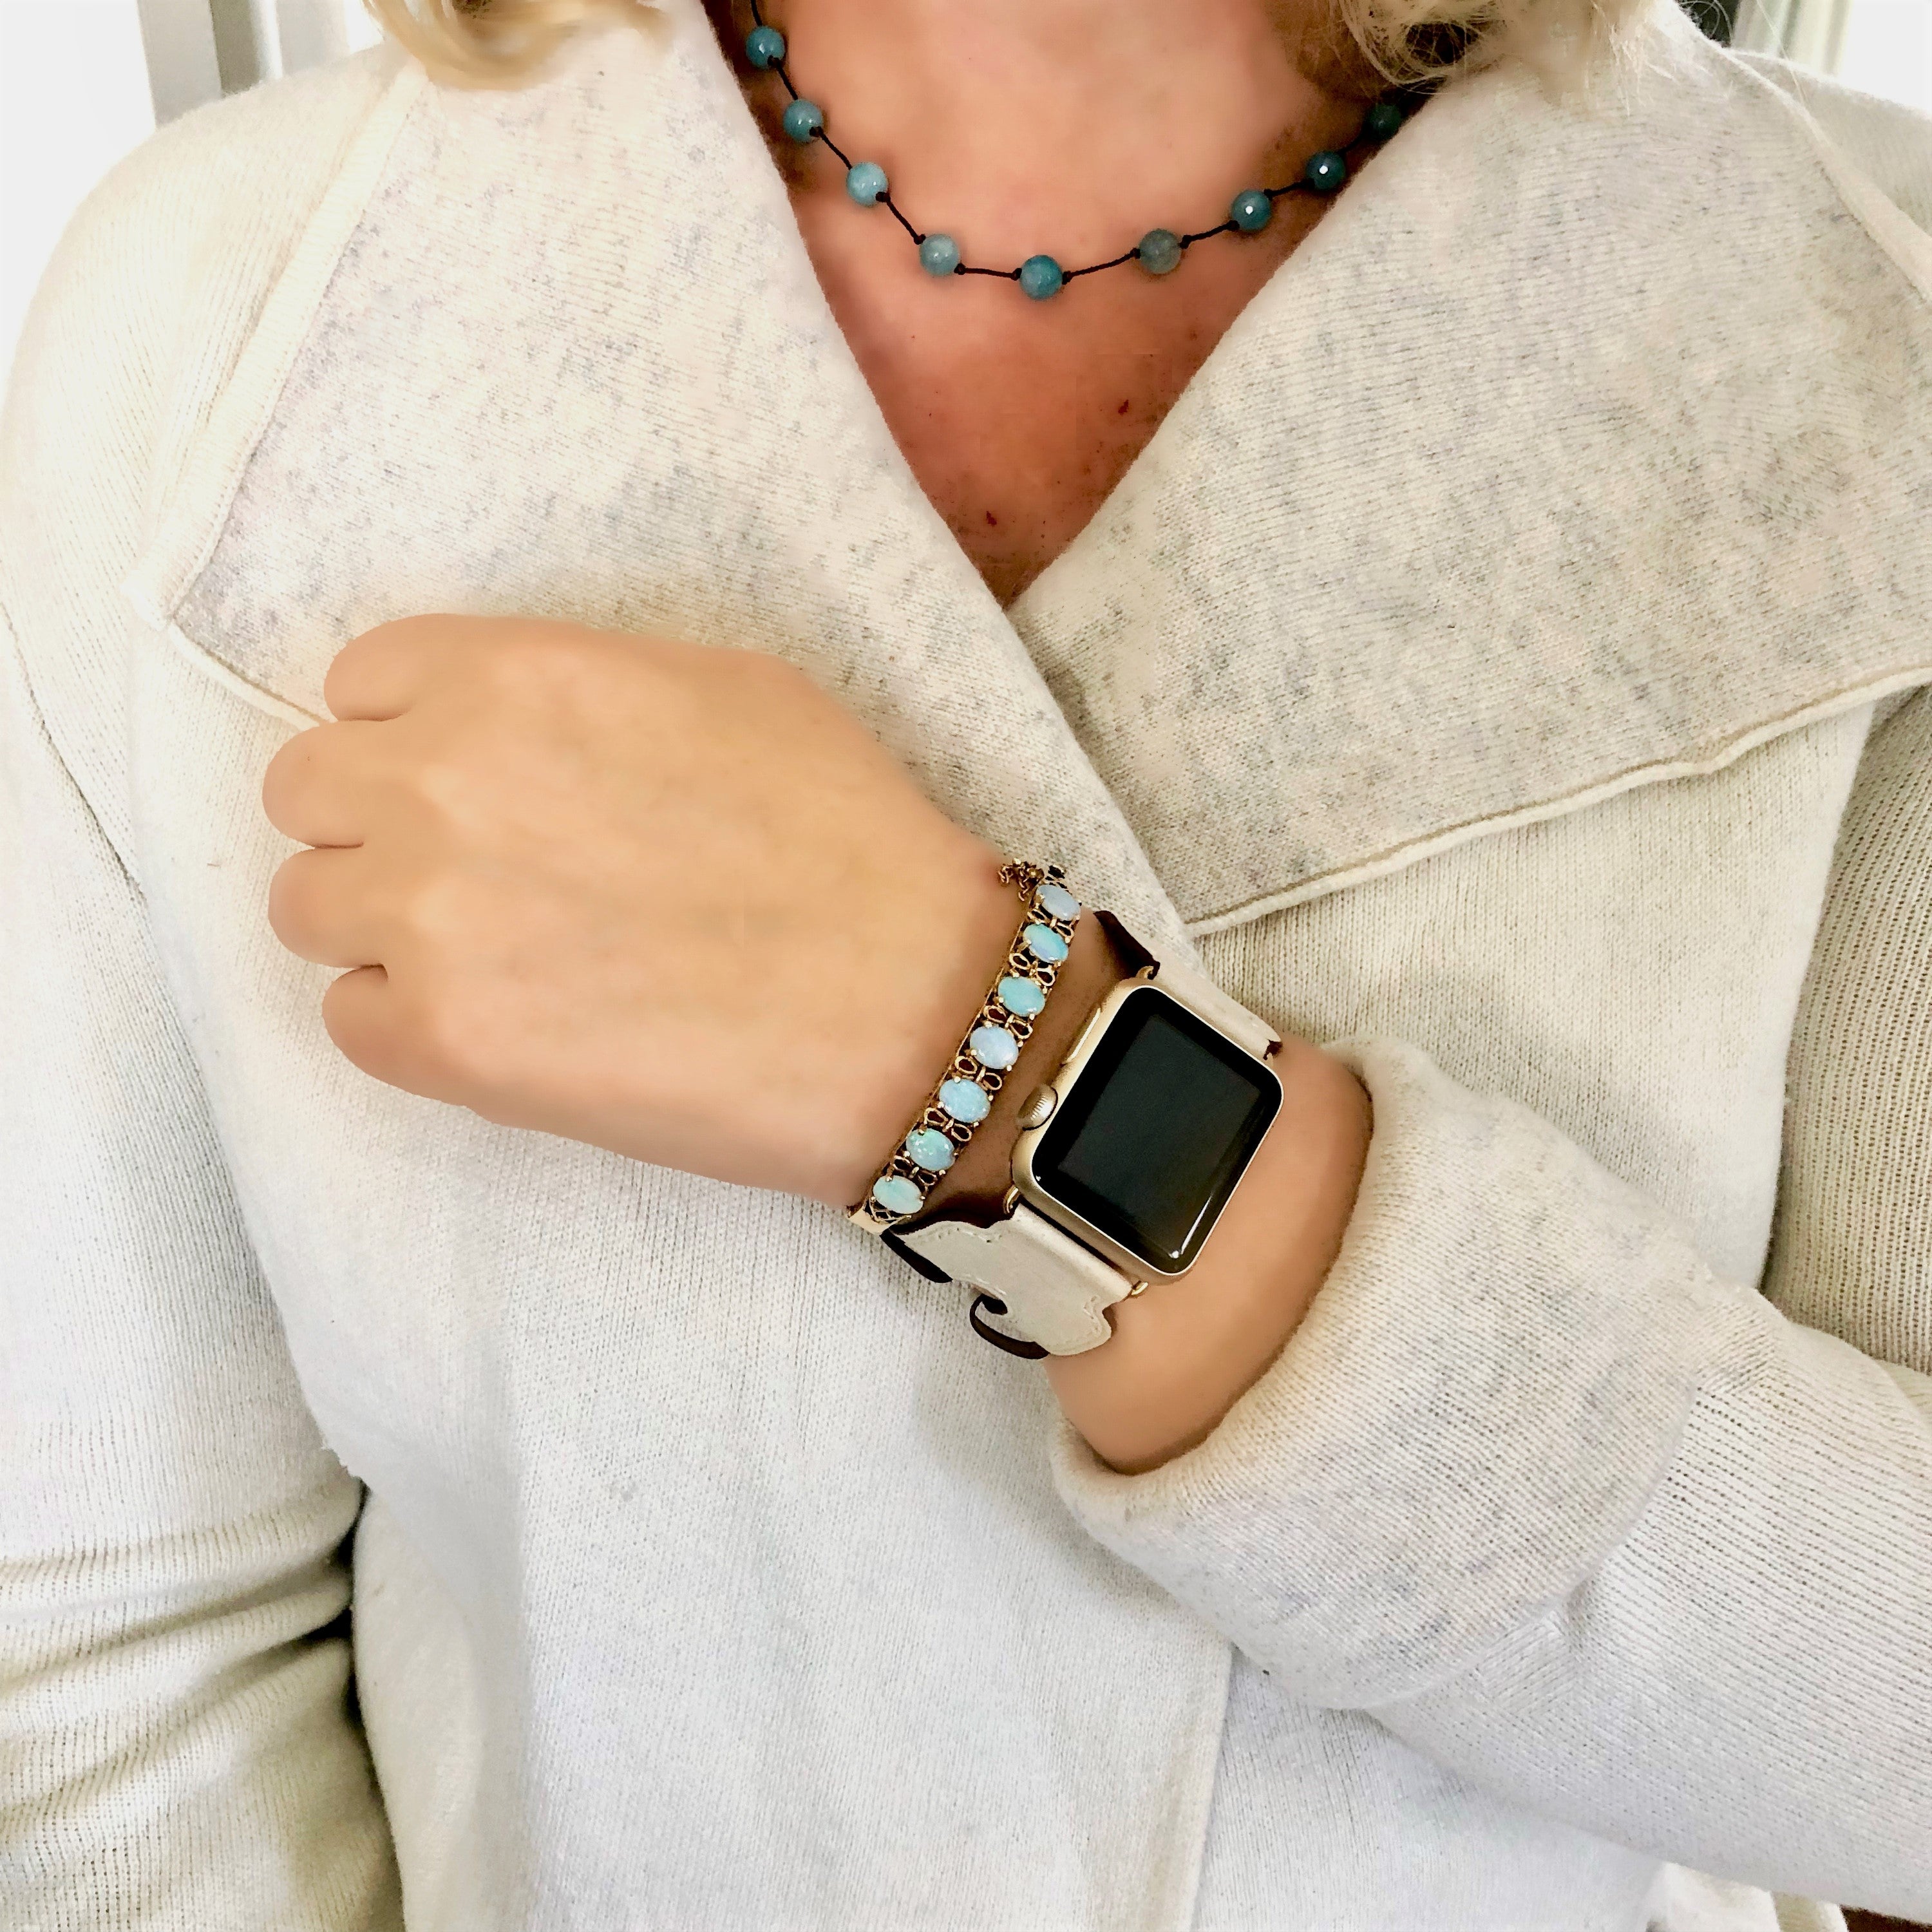 Juxli Home Ivory Double Buckle Leather Apple Watch Cuff on Woman Wearing Ivory Sweater